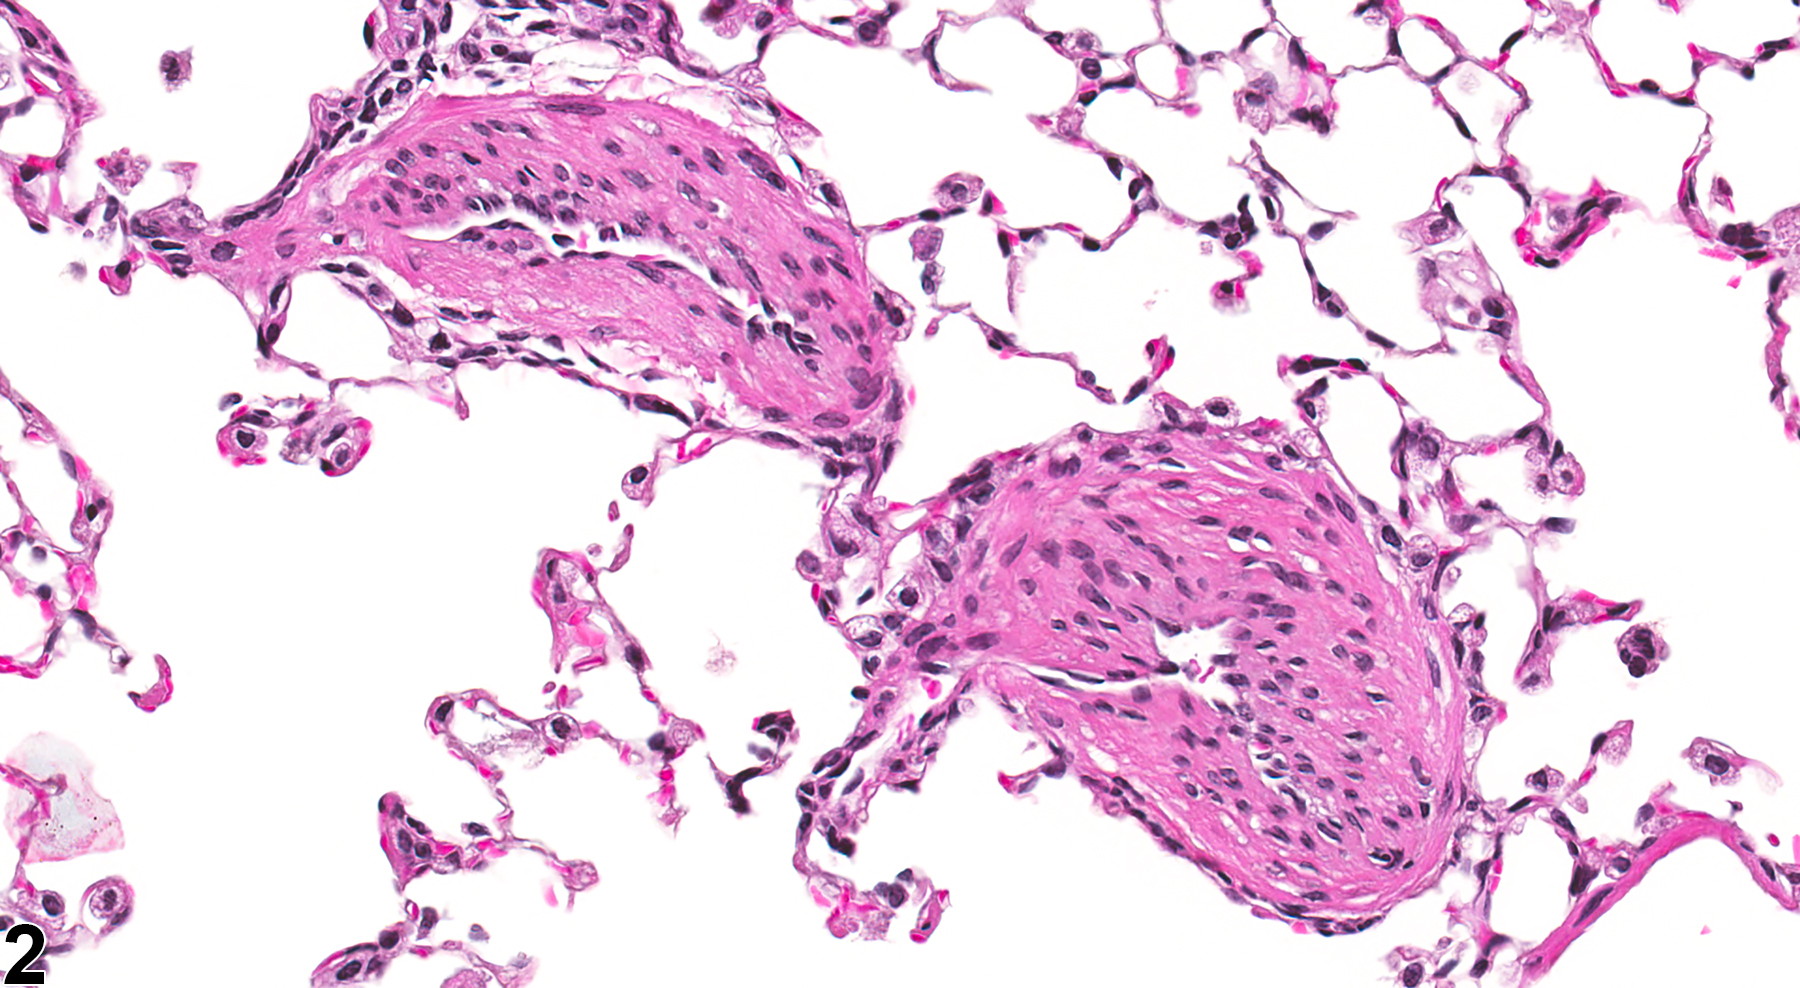 Image of hypertrophy, medial in the lung, artery from a male B6C3F1/N mouse in a subchronic study